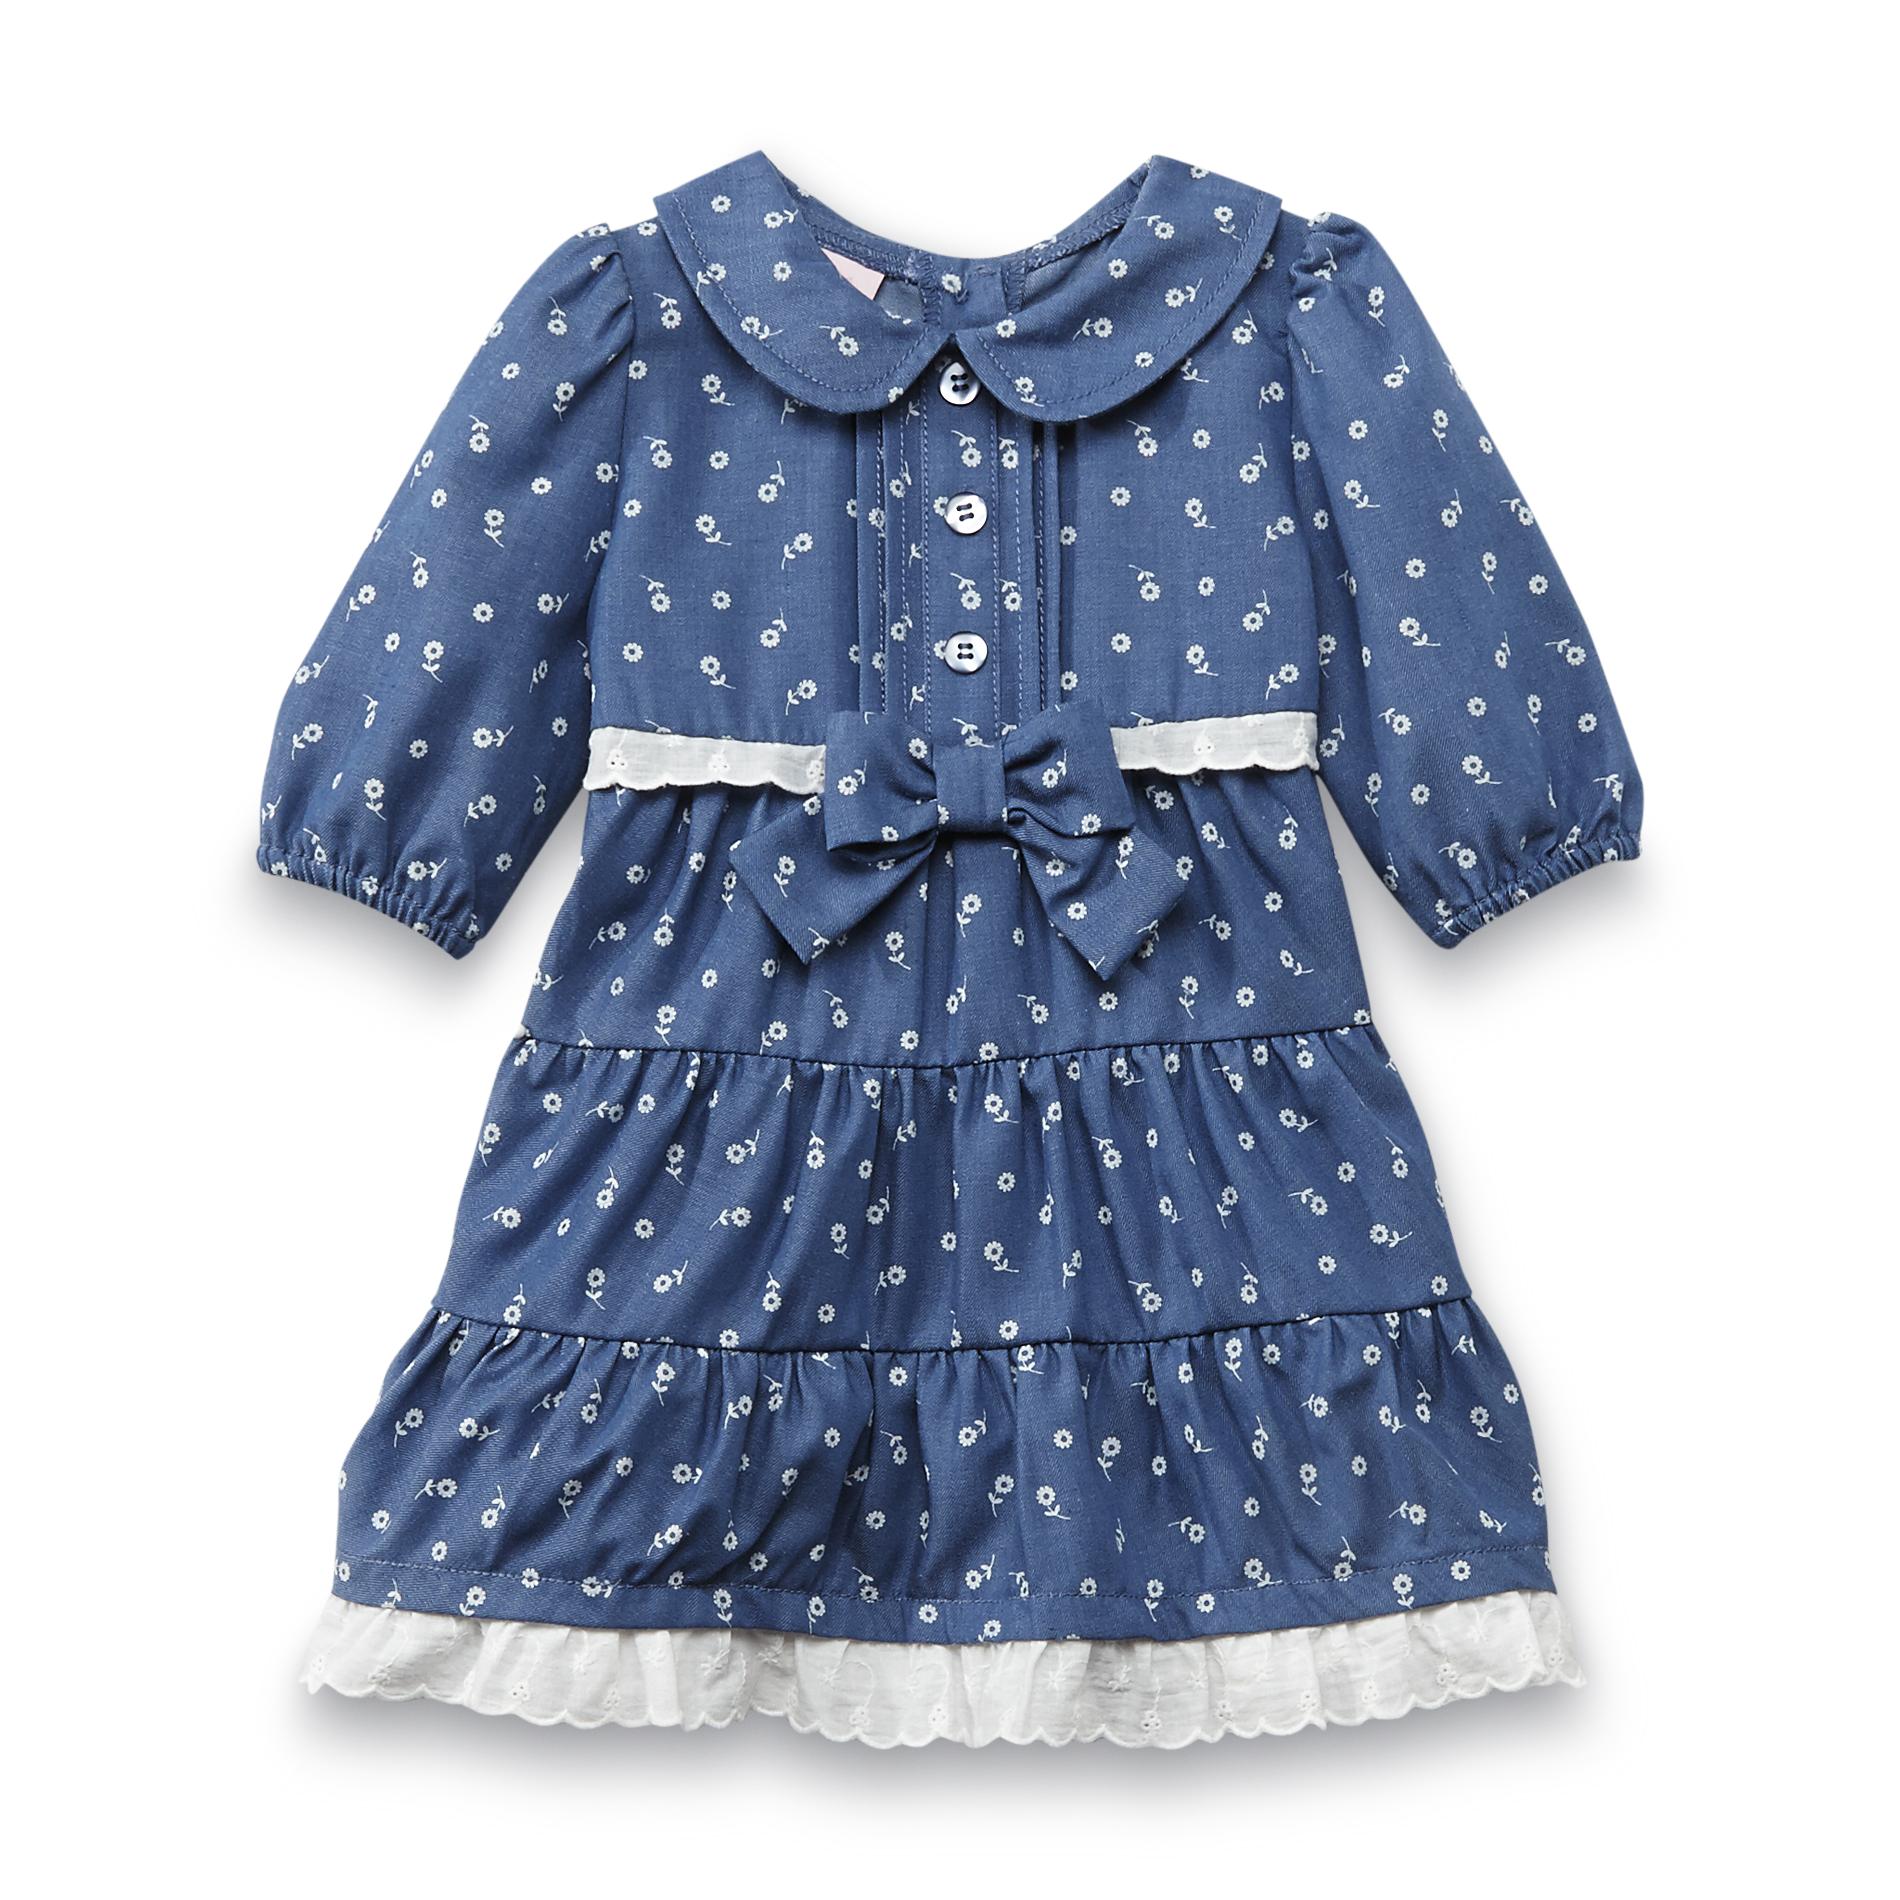 Route 66 Newborn Girl's Chambray Dress - Floral